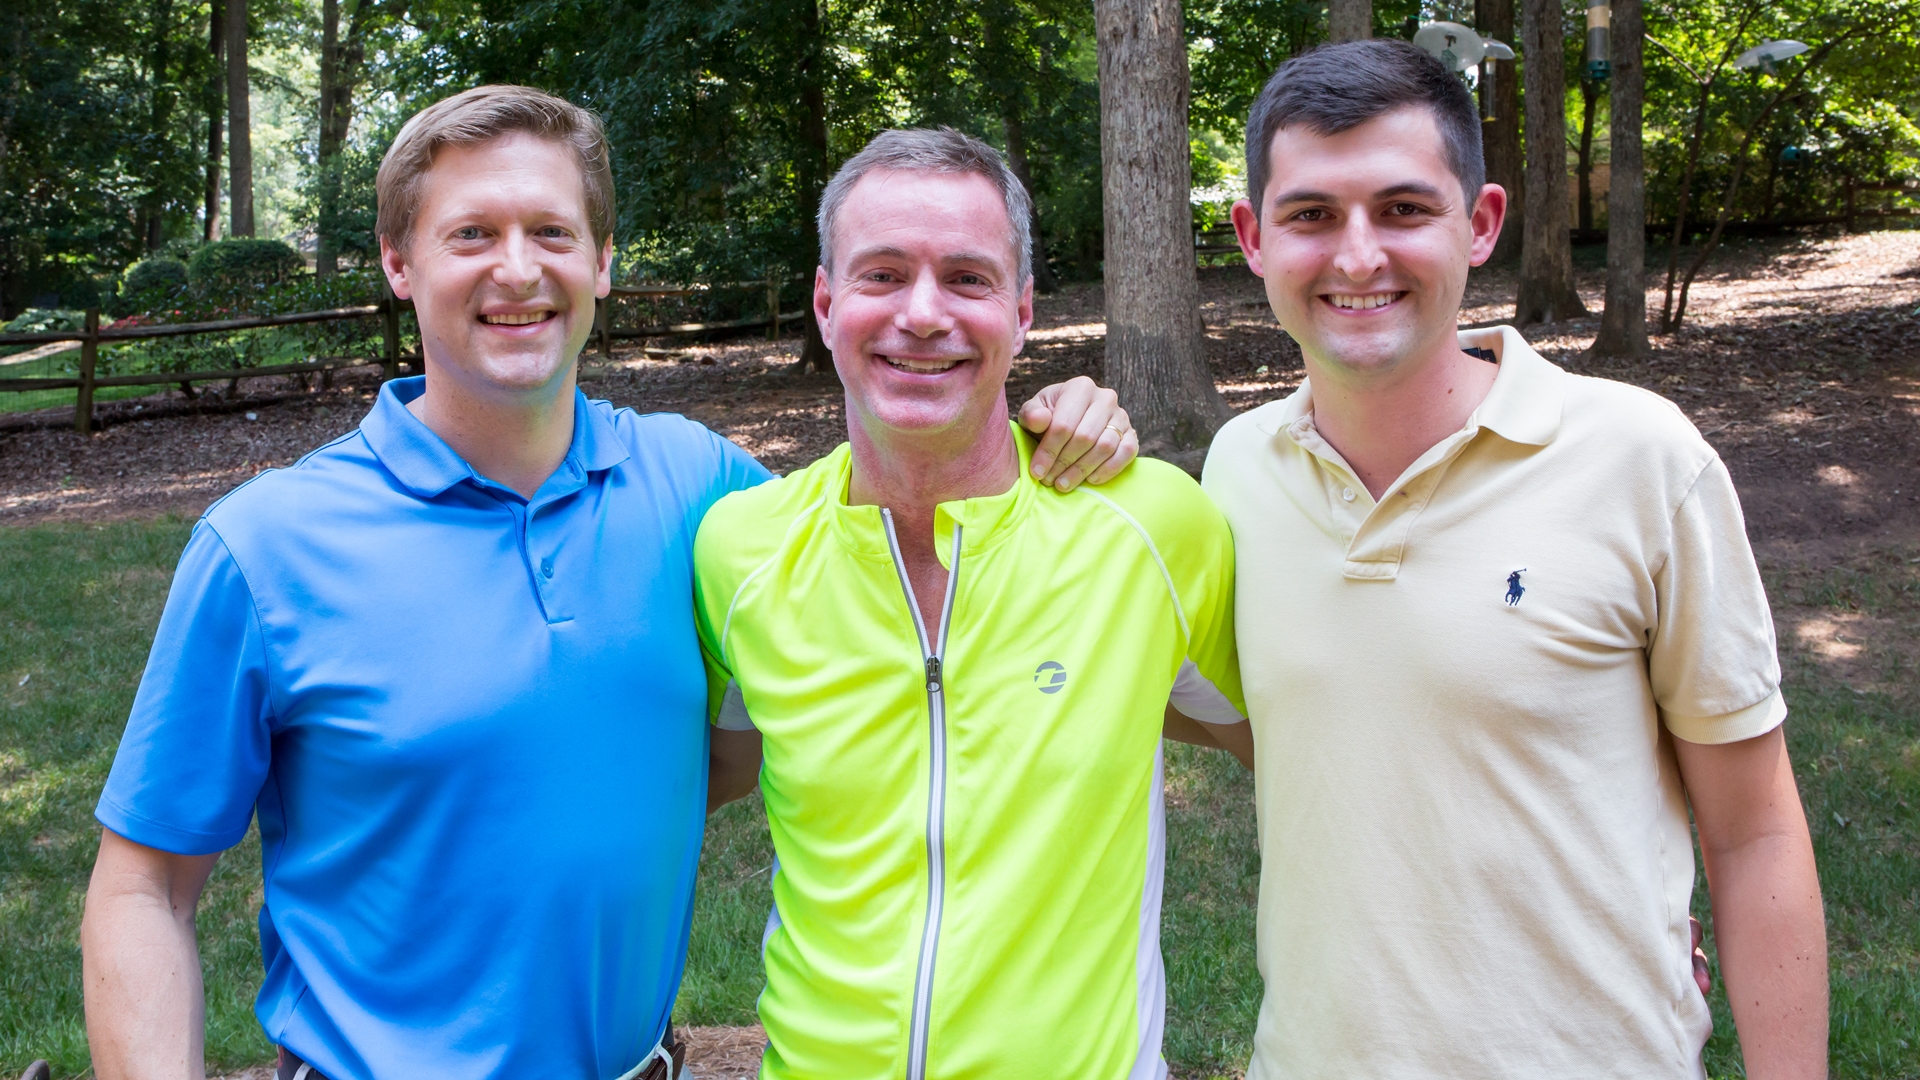 From left: Matt McGirt, MD, neurosurgeon, Dean Otto, Will Huffman, driver. The three men have become close friends and are all running a half marathon together on the one-year anniversary of Otto's accident.